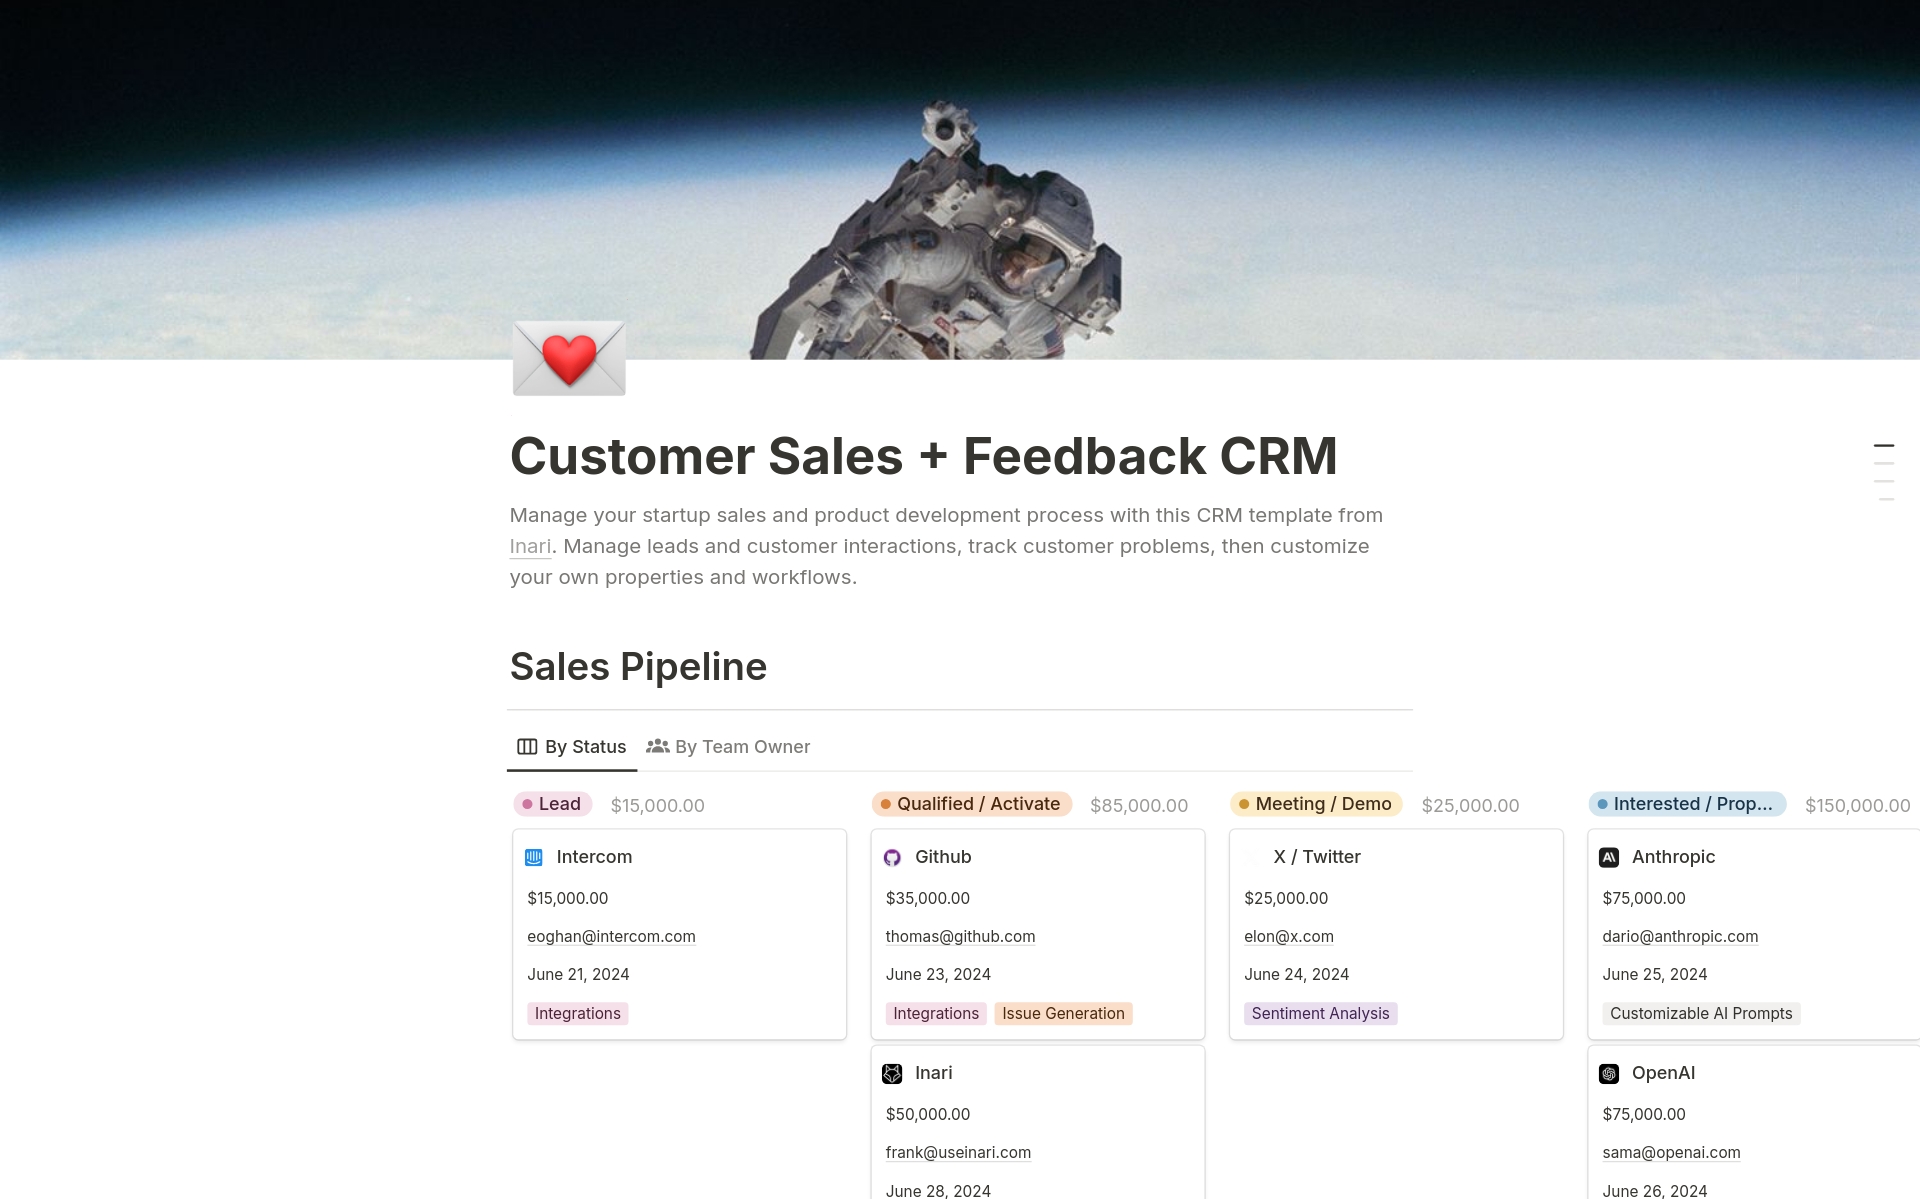 A template preview for Inari's Customer Sales + Feedback CRM